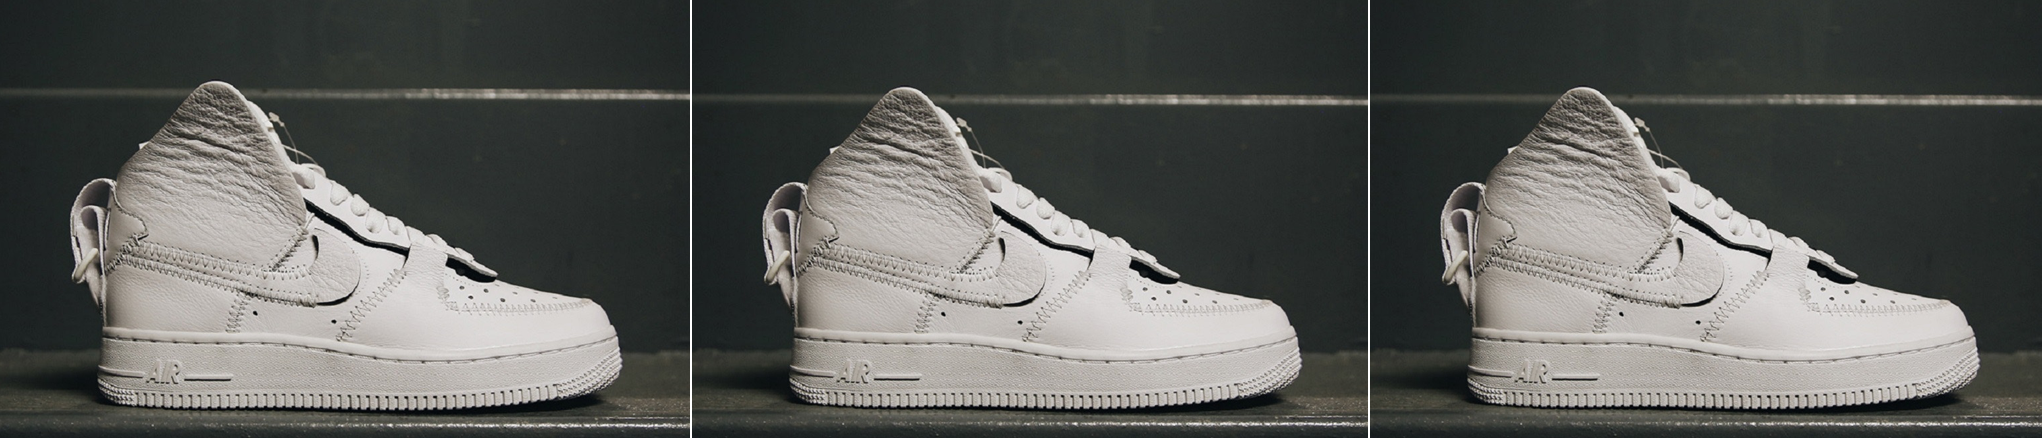 Public School NY x Nike Air Force 1 Collab Revealed